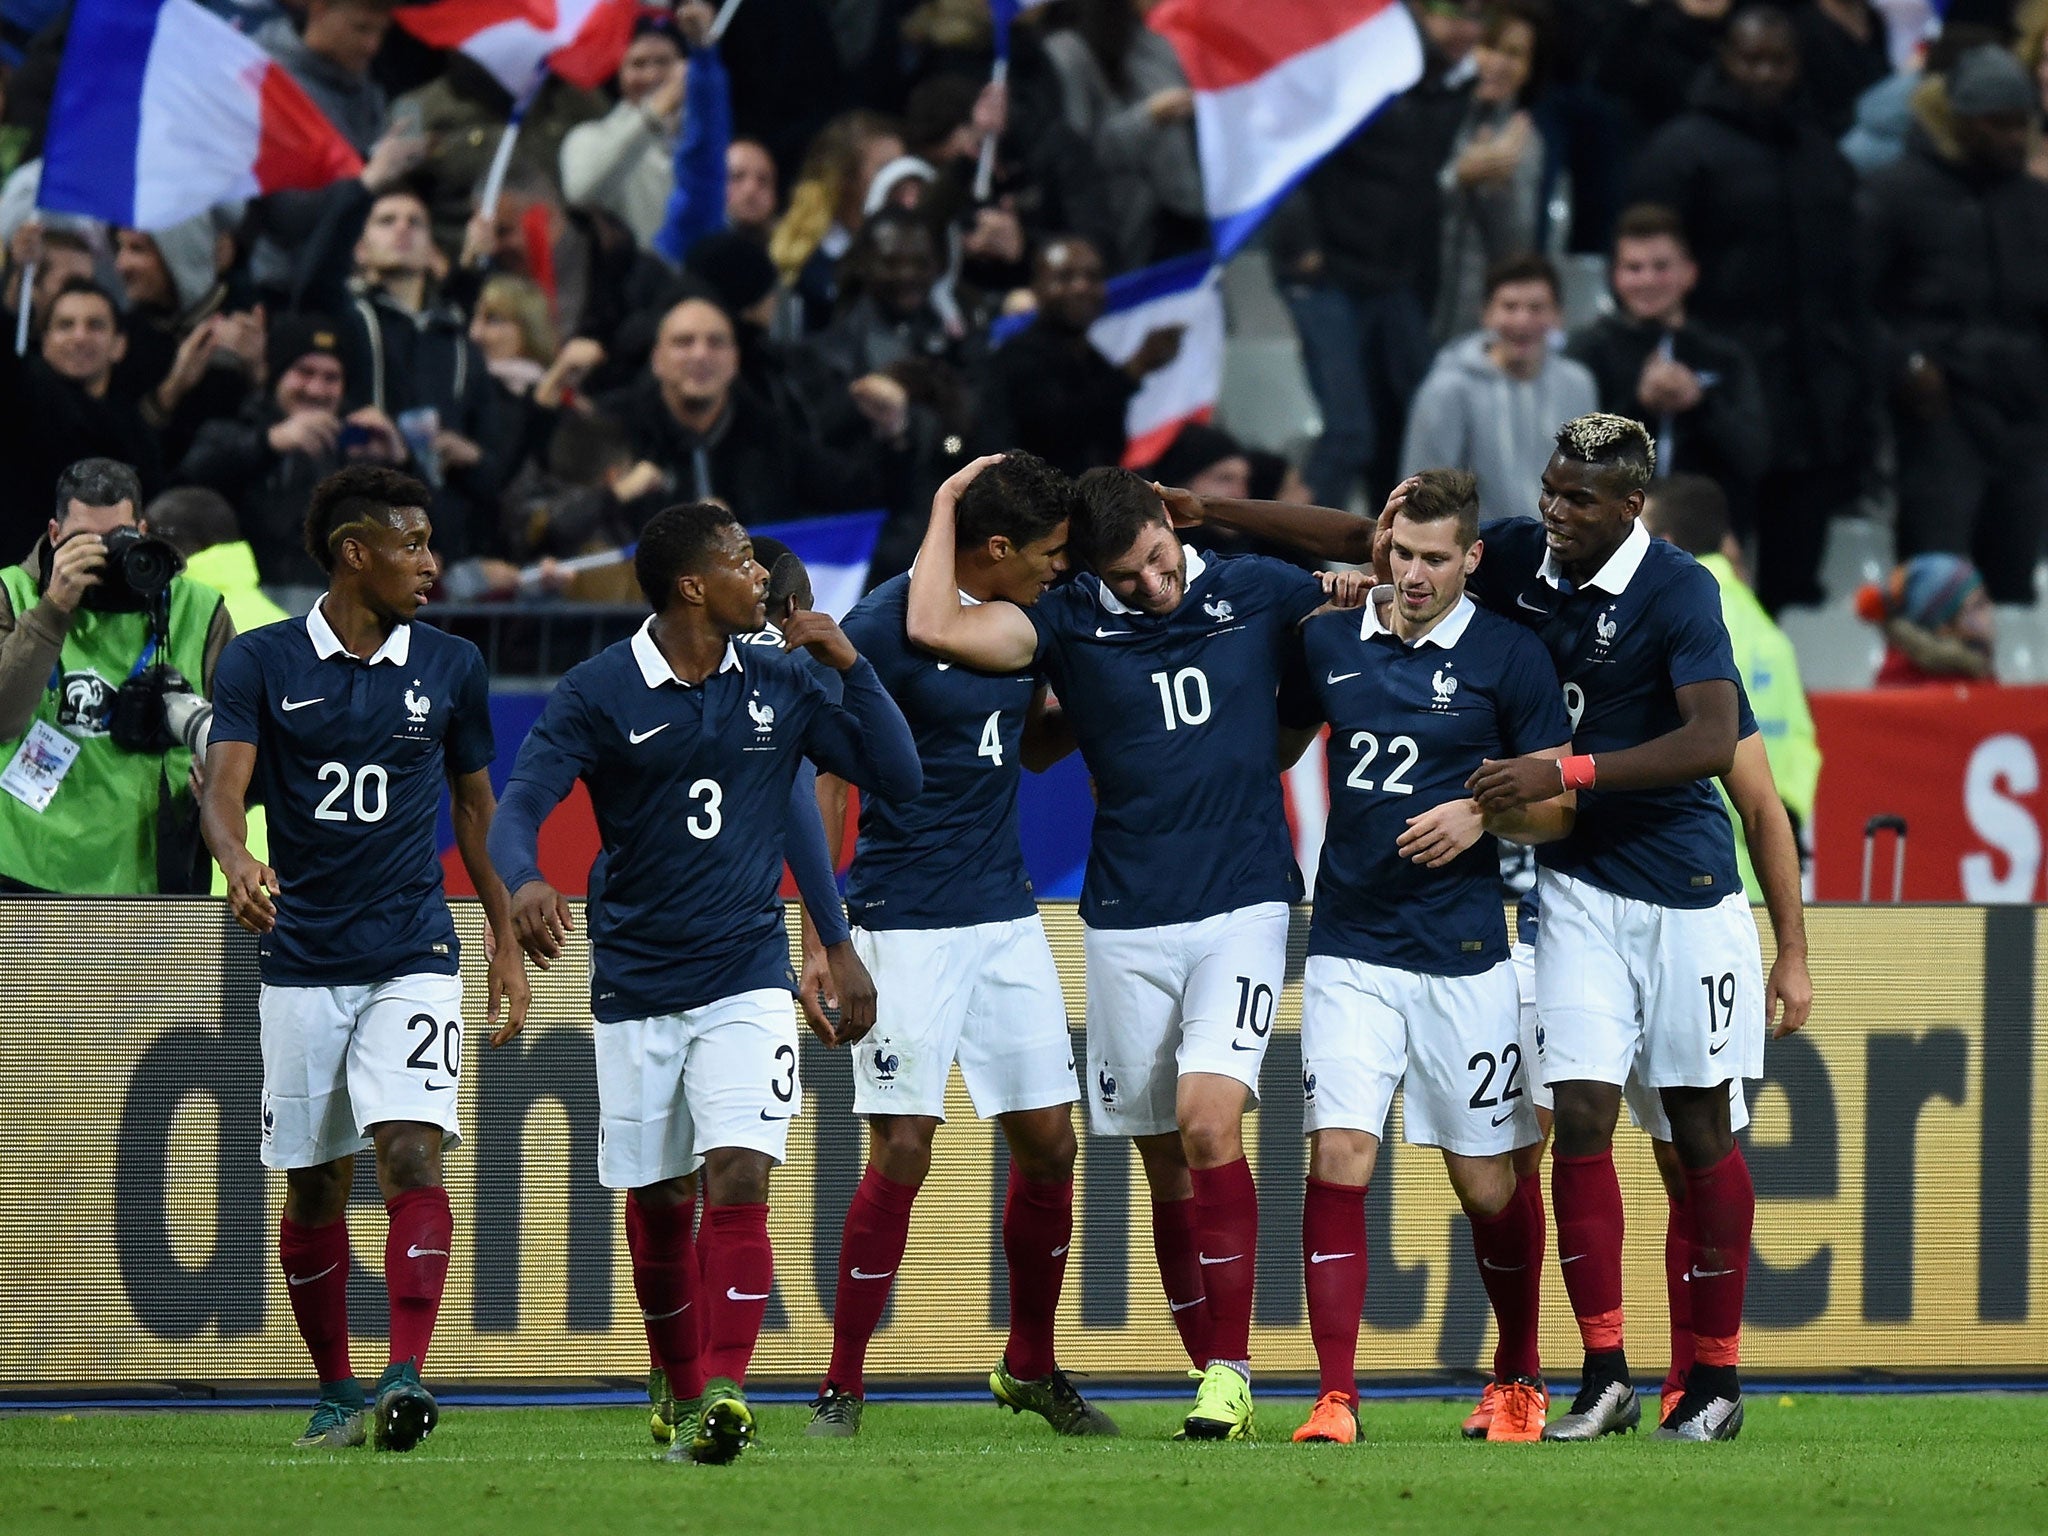 FFF president Noel Le Graet did not consult the Franch players over the decision to play England